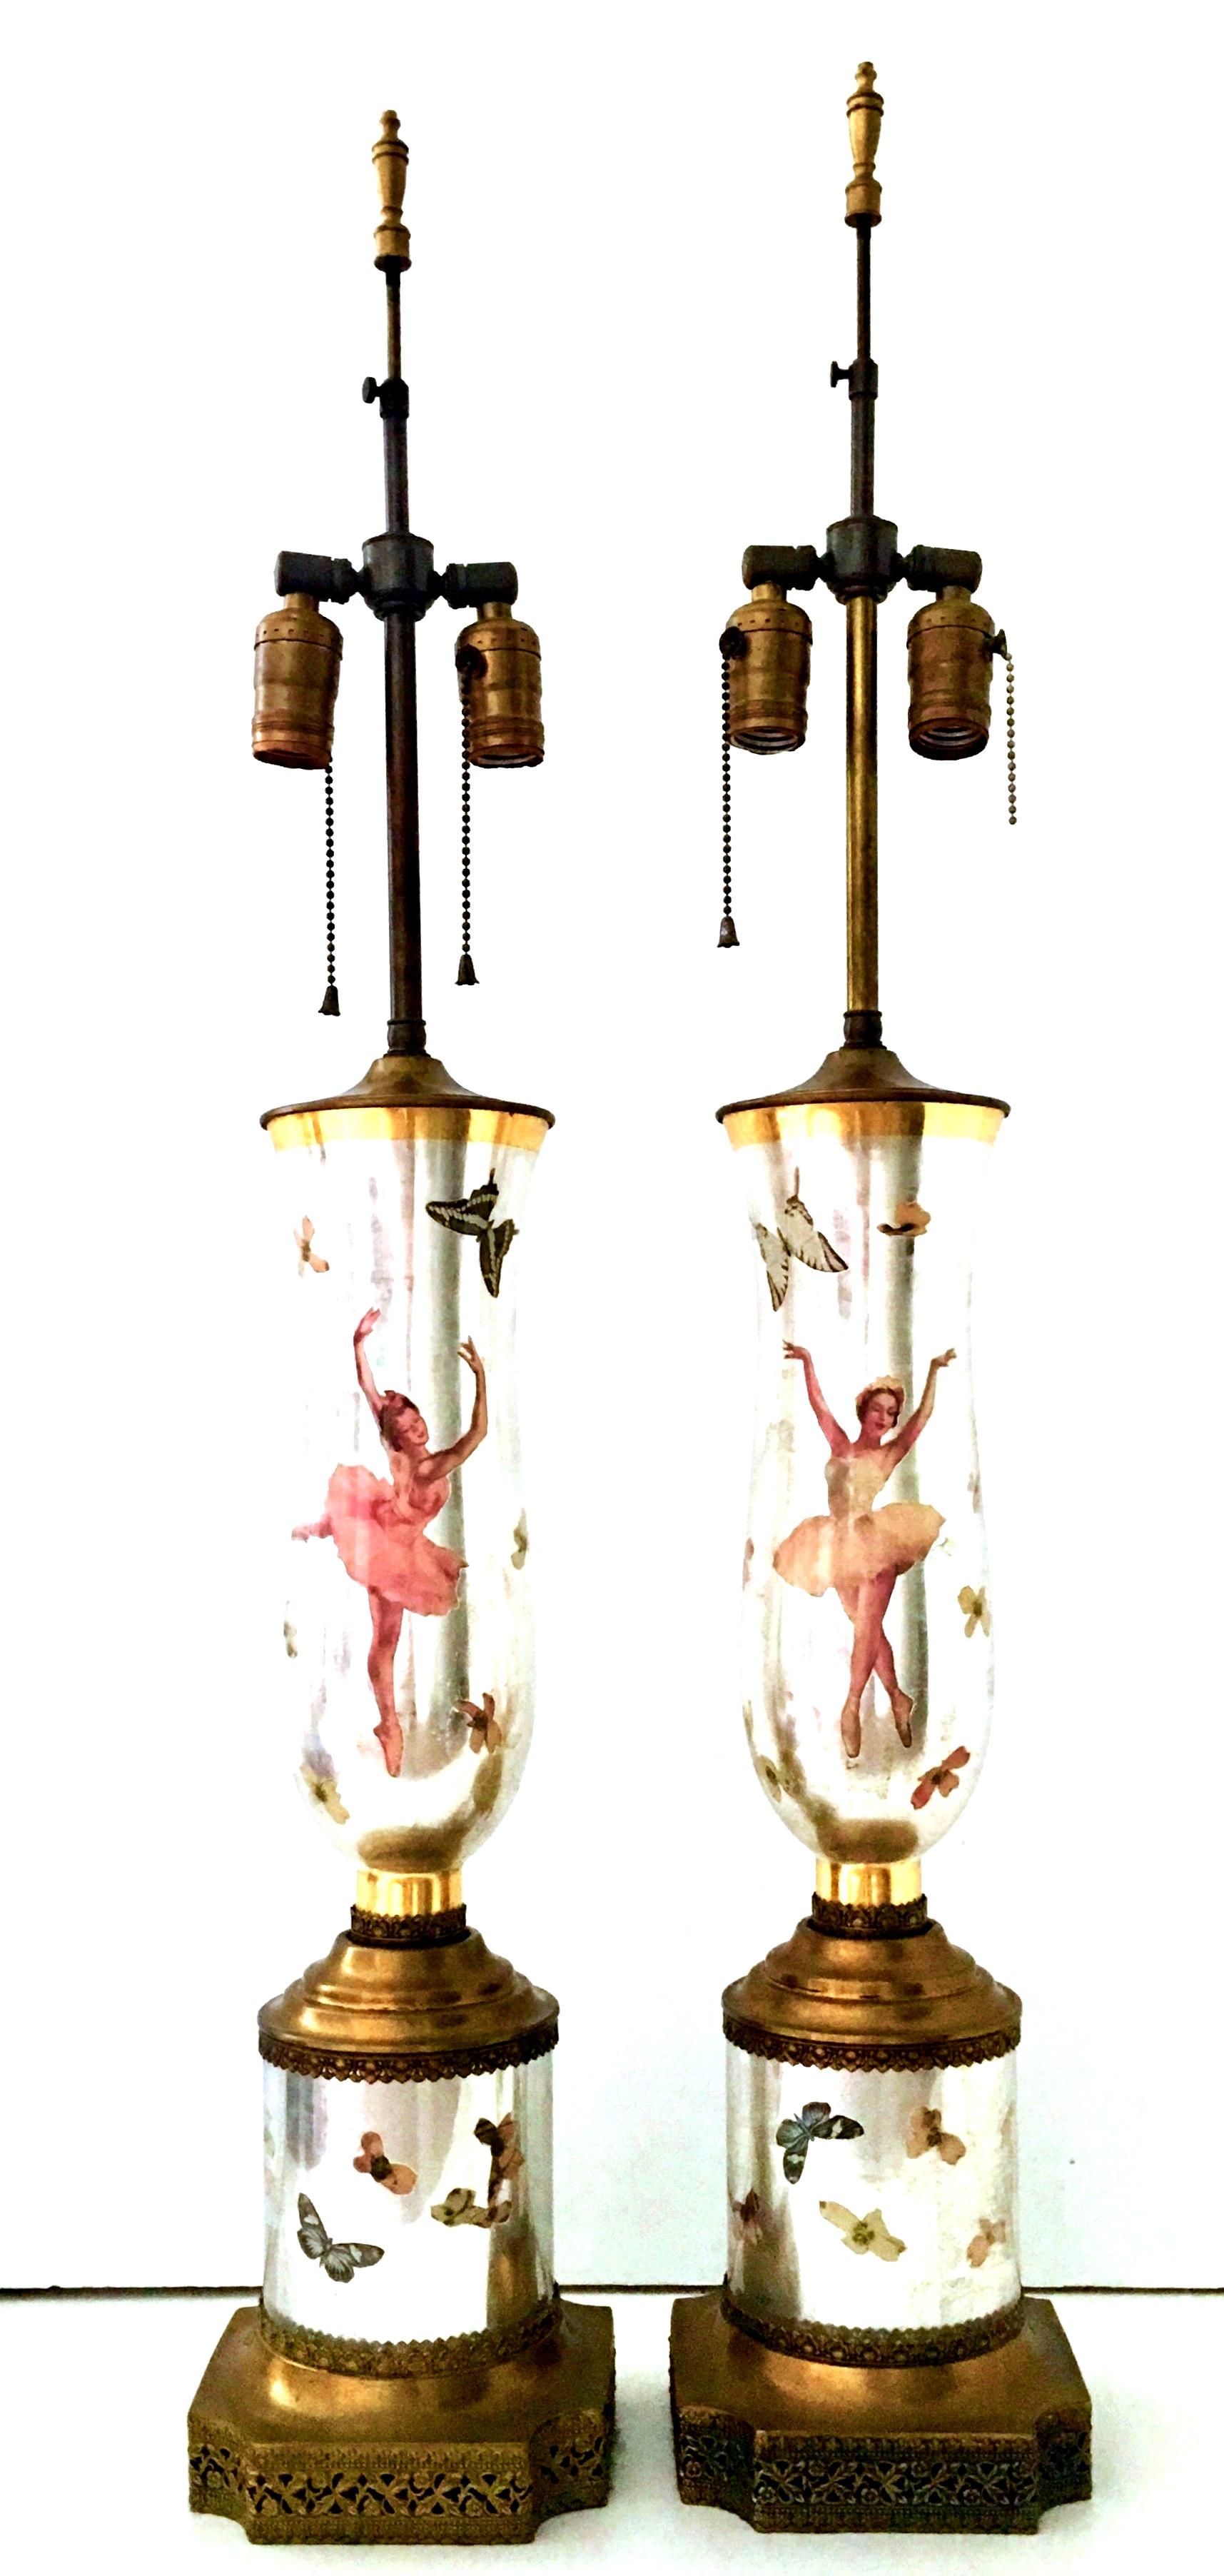 20th Century Pair of fine Art Deco silver leaf eglomise reverse painted art glass ballerina and butterfly decoupage lamps. Beautifully executed with original gilt brass filigree hardware and fittings. Double socket pull chain detail.
Wired for the